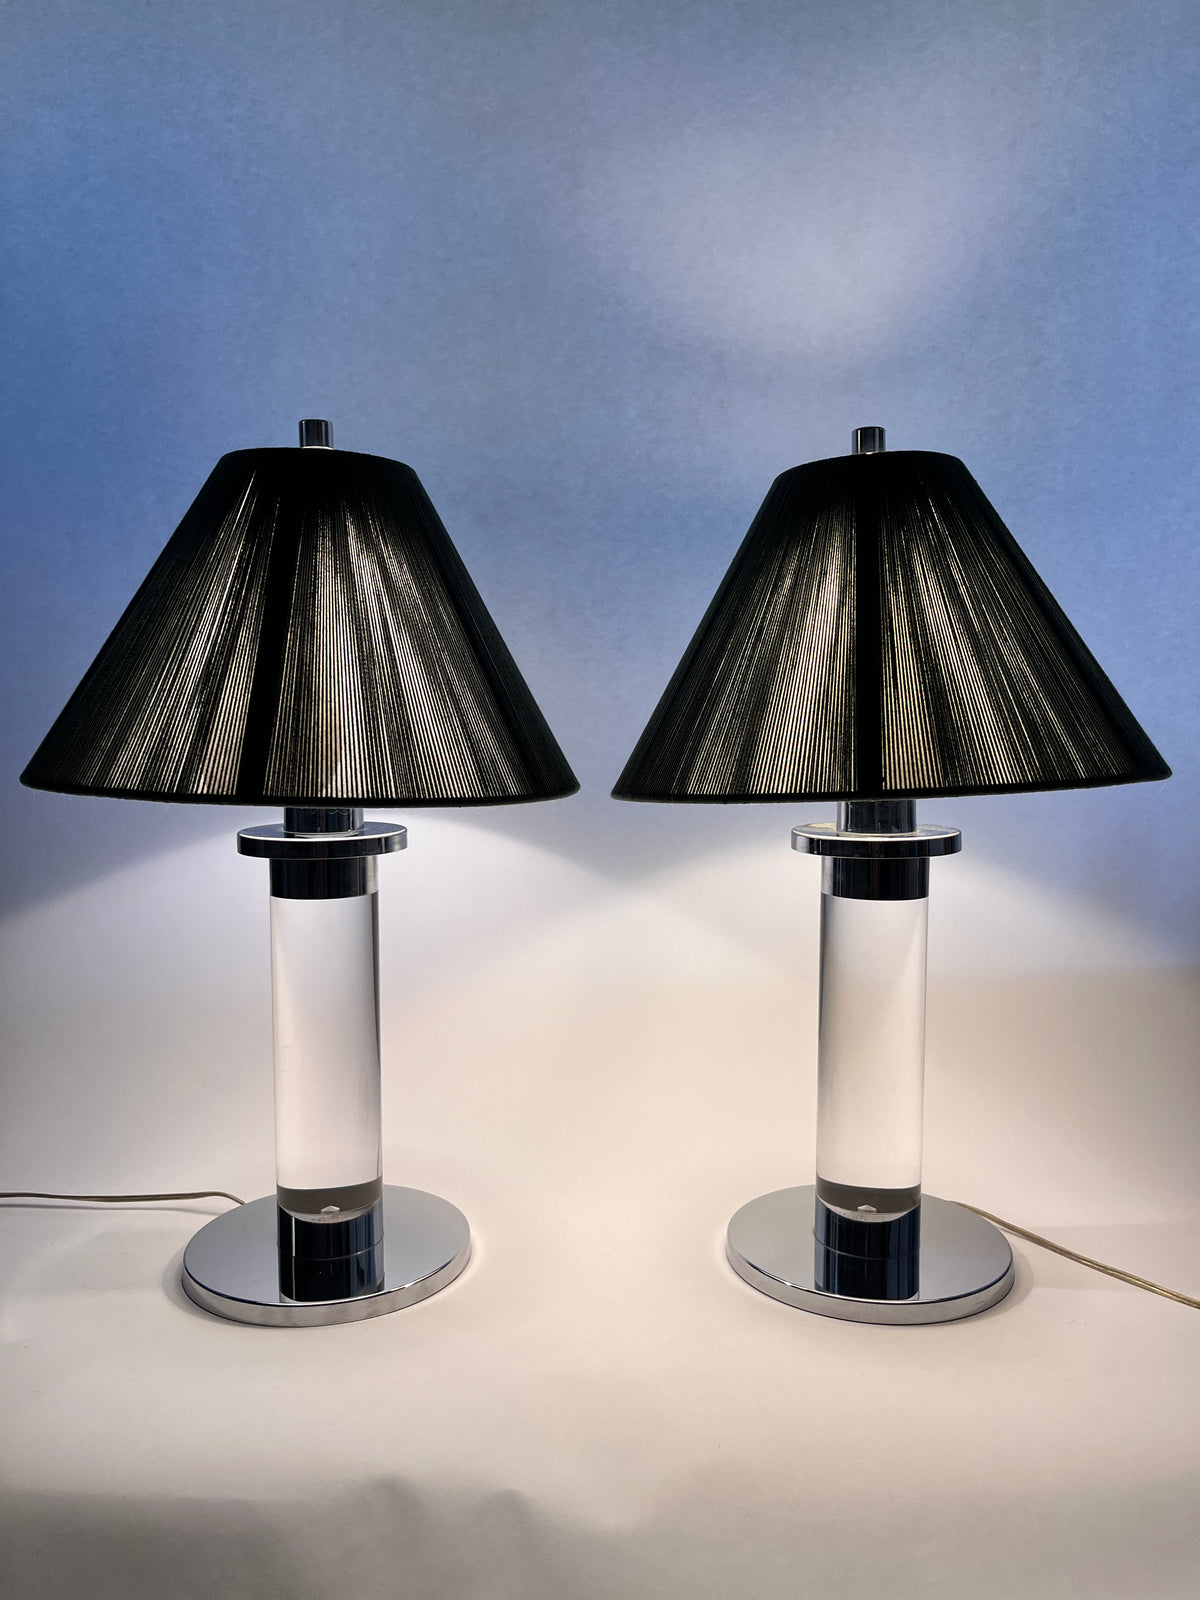 Vintage Lucite & Chrome Lamps with Shades by Frederick Cooper Chicago, A Pair